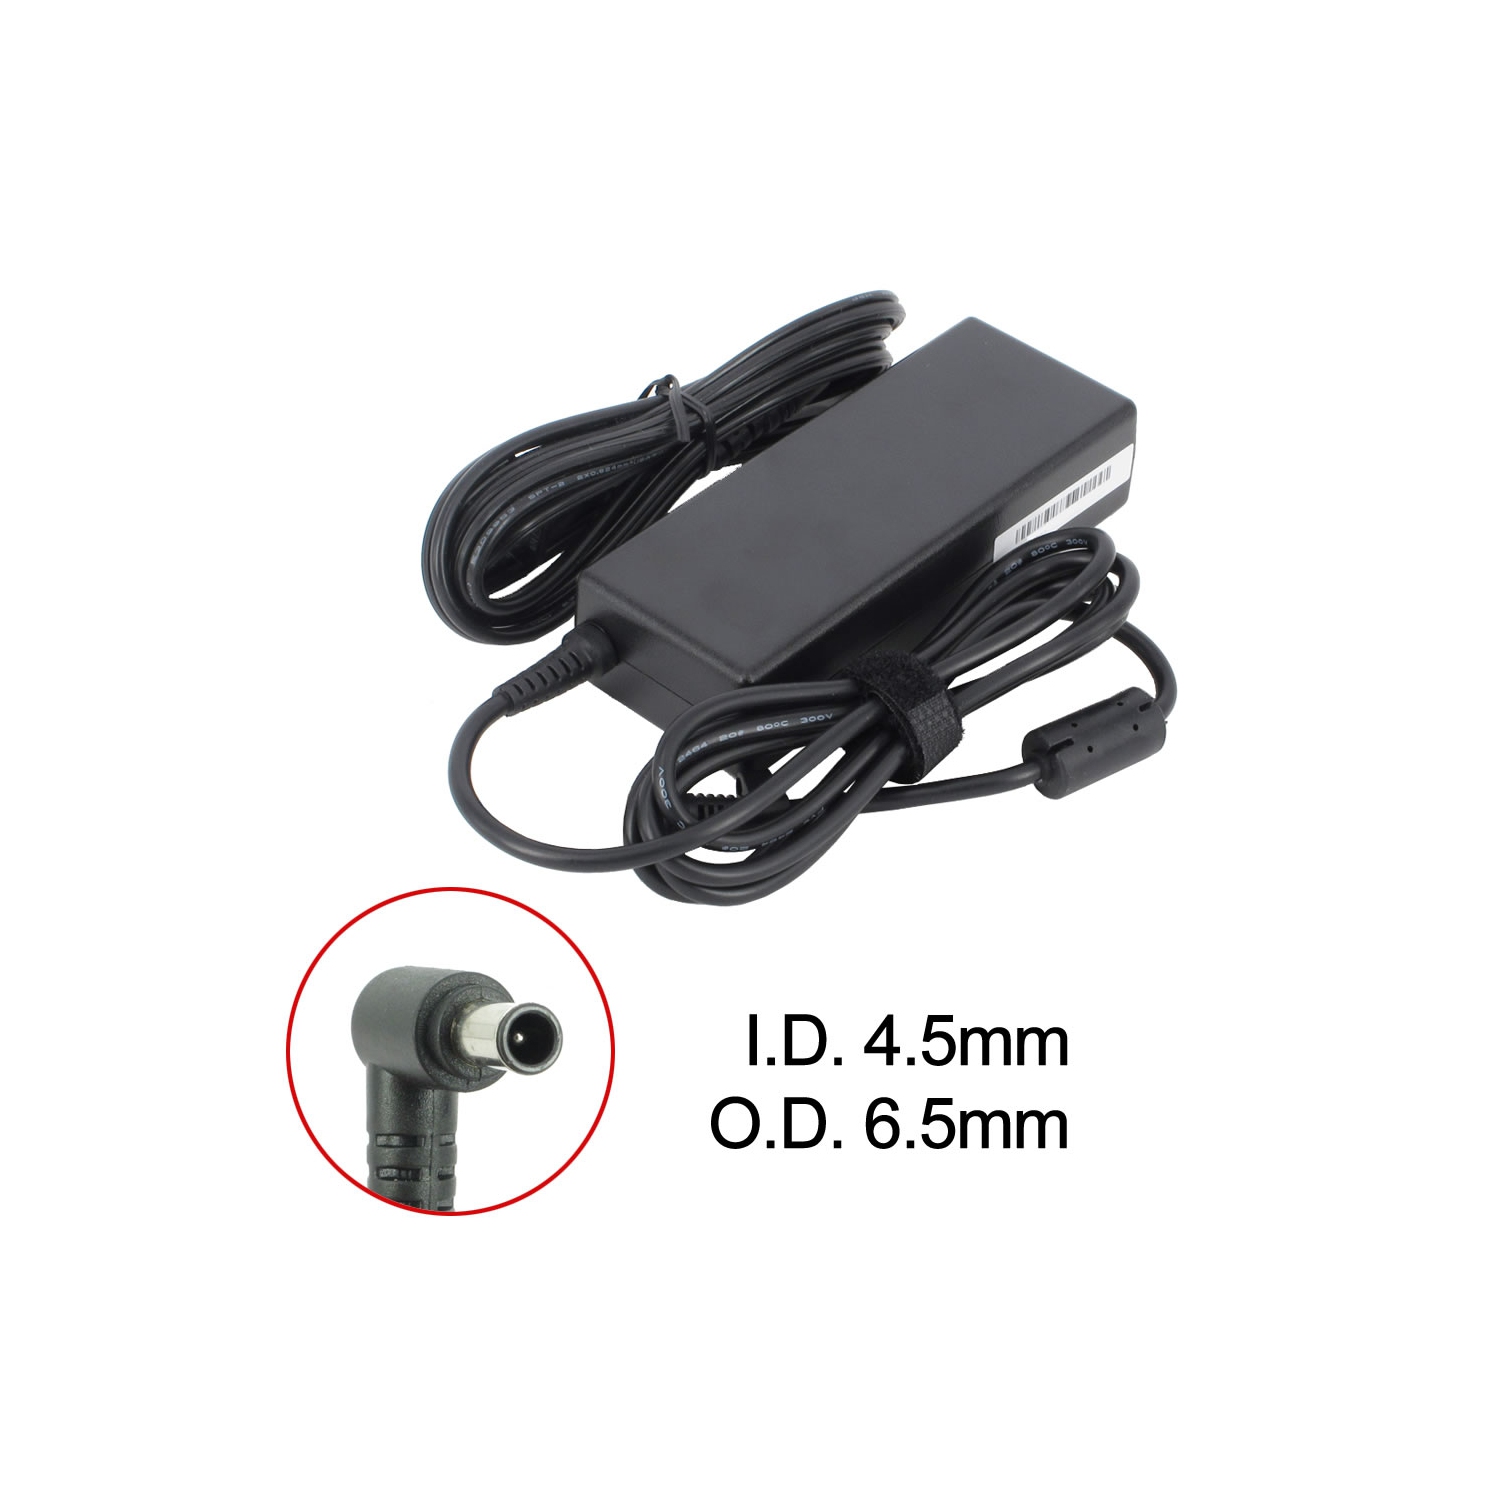 Brand New Laptop AC Adapter for Sony VAIO VGN-FS645 Series, PCGA-AC19V11, VGP-AC19V10, VGP-AC19V21, VGP-AC19V31, VGP-AC19V67